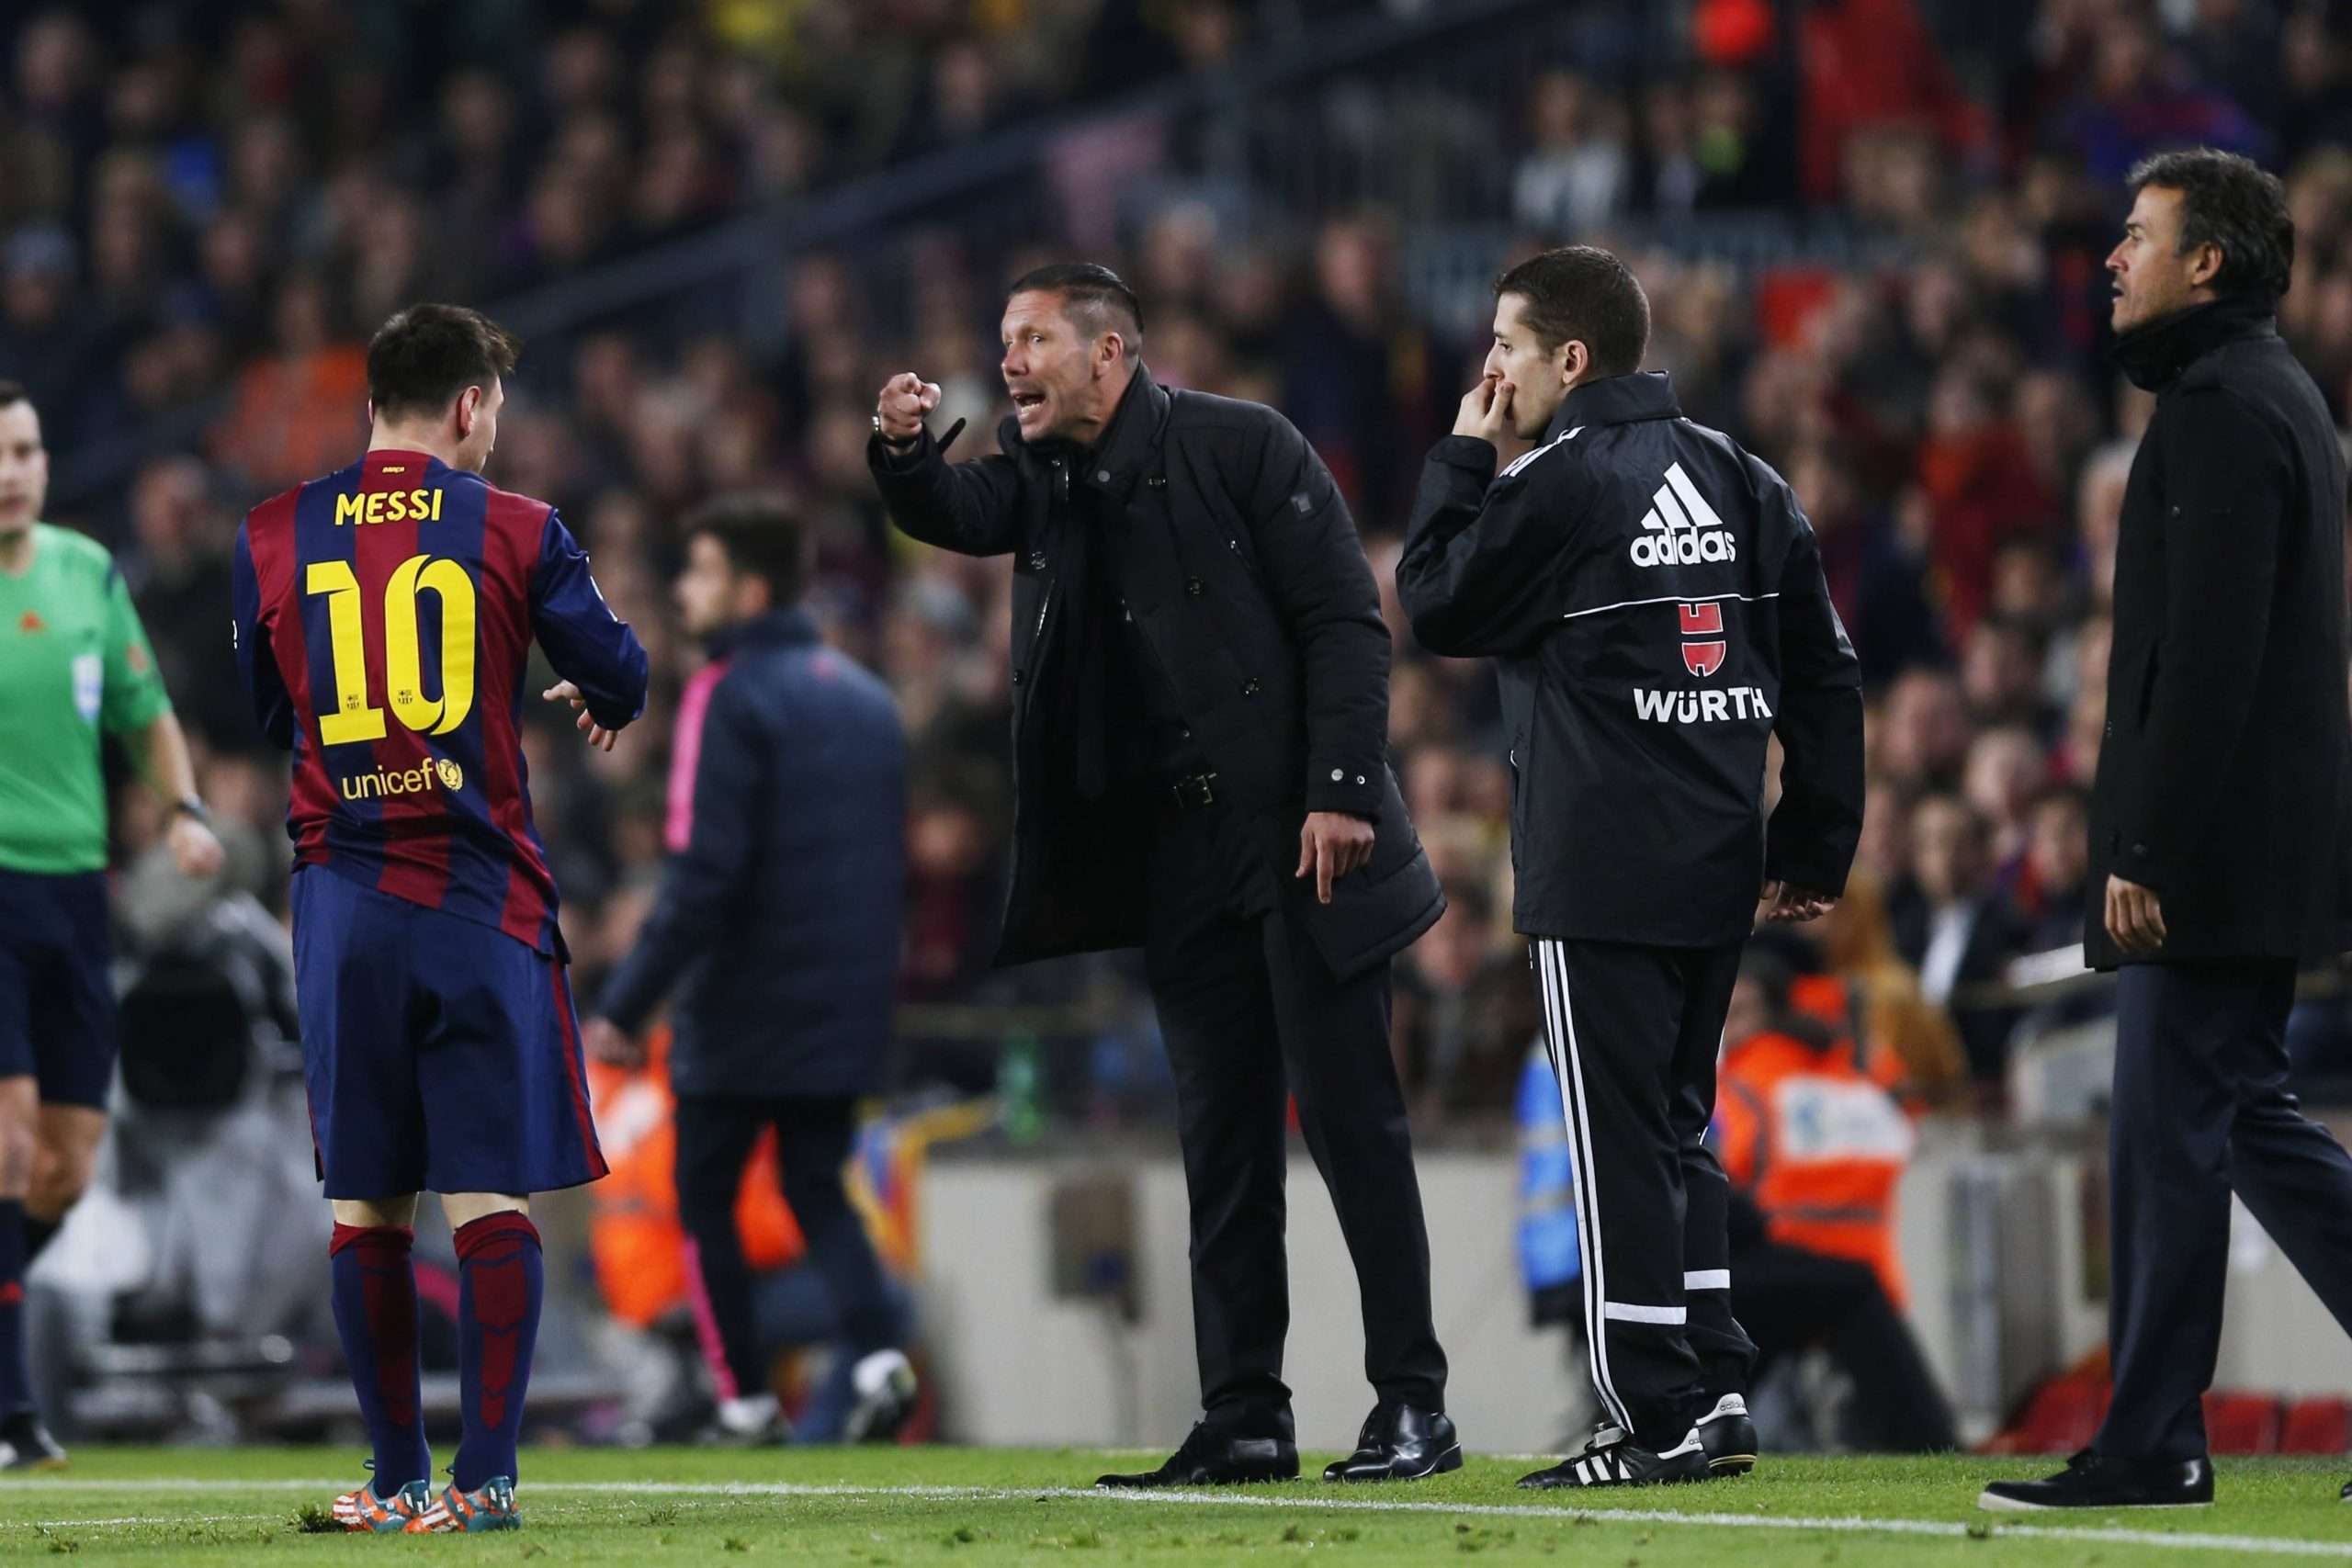 Diego Simeone tried to convince Lionel Messi to join Atlético Madrid - Get  Spanish Football News